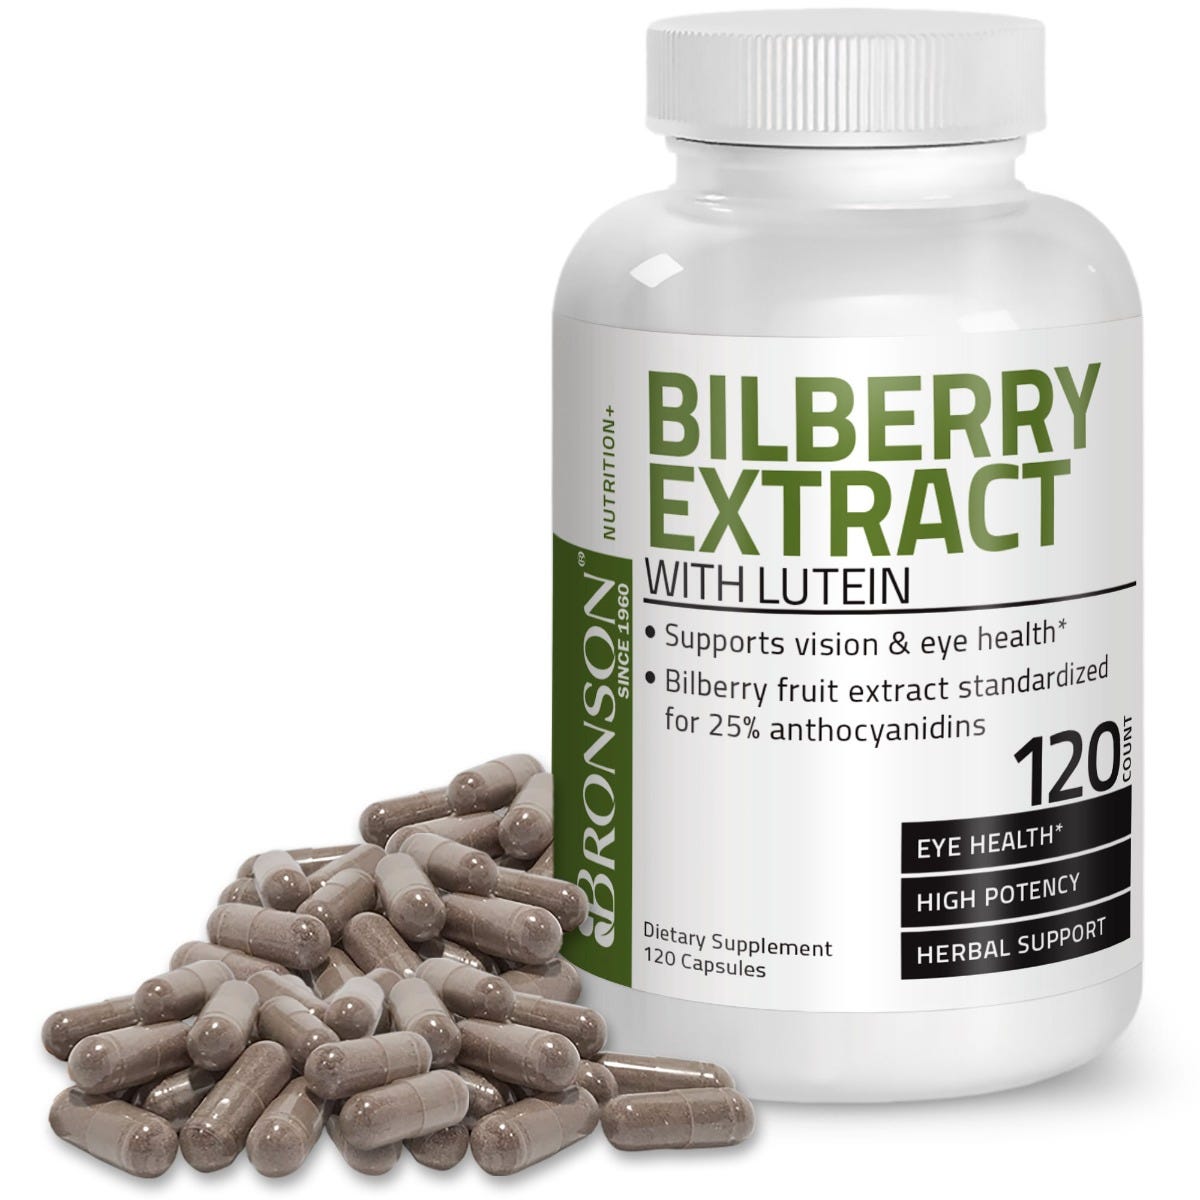 Bilberry with Lutein High Potency - 120 Capsules view 3 of 6